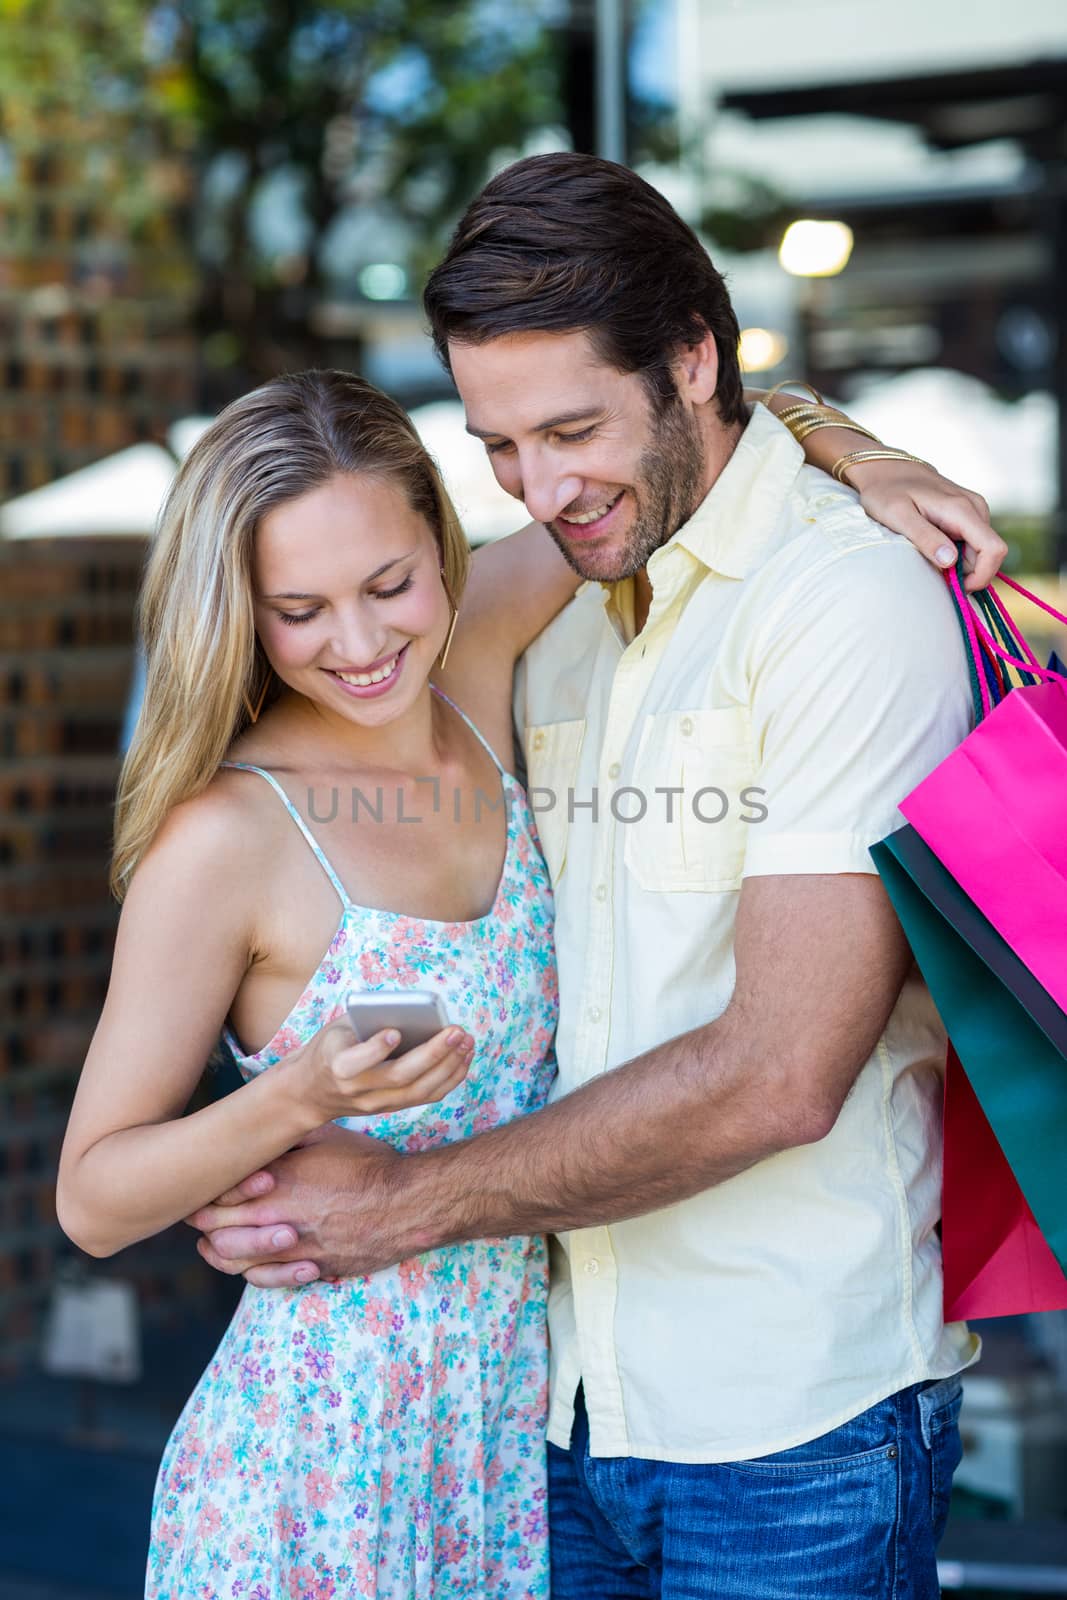 Smiling couple embracing and looking at smartphone by Wavebreakmedia